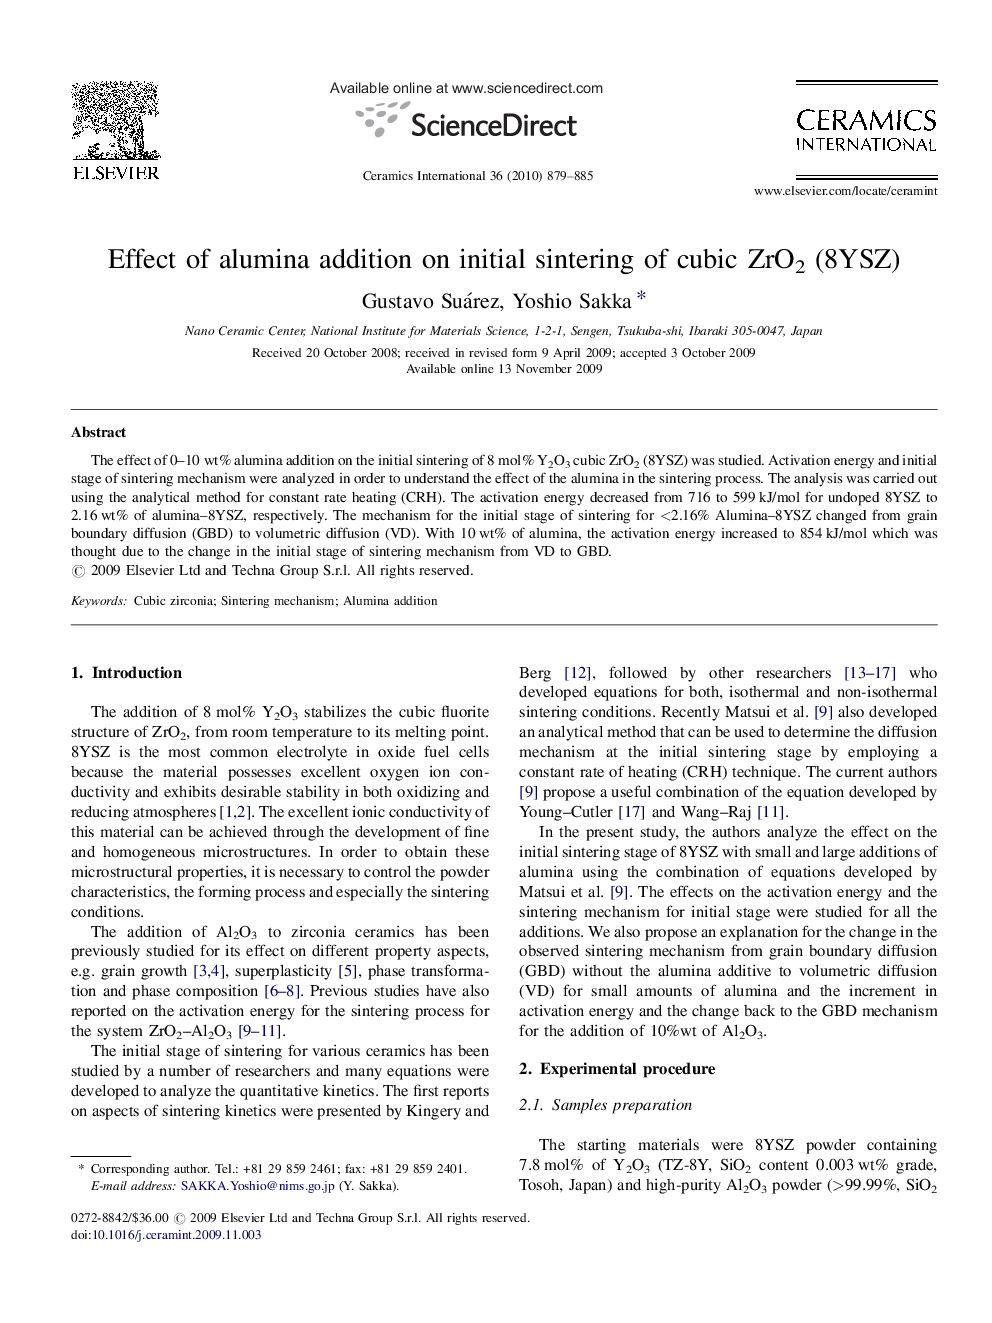 Effect of alumina addition on initial sintering of cubic ZrO2 (8YSZ)